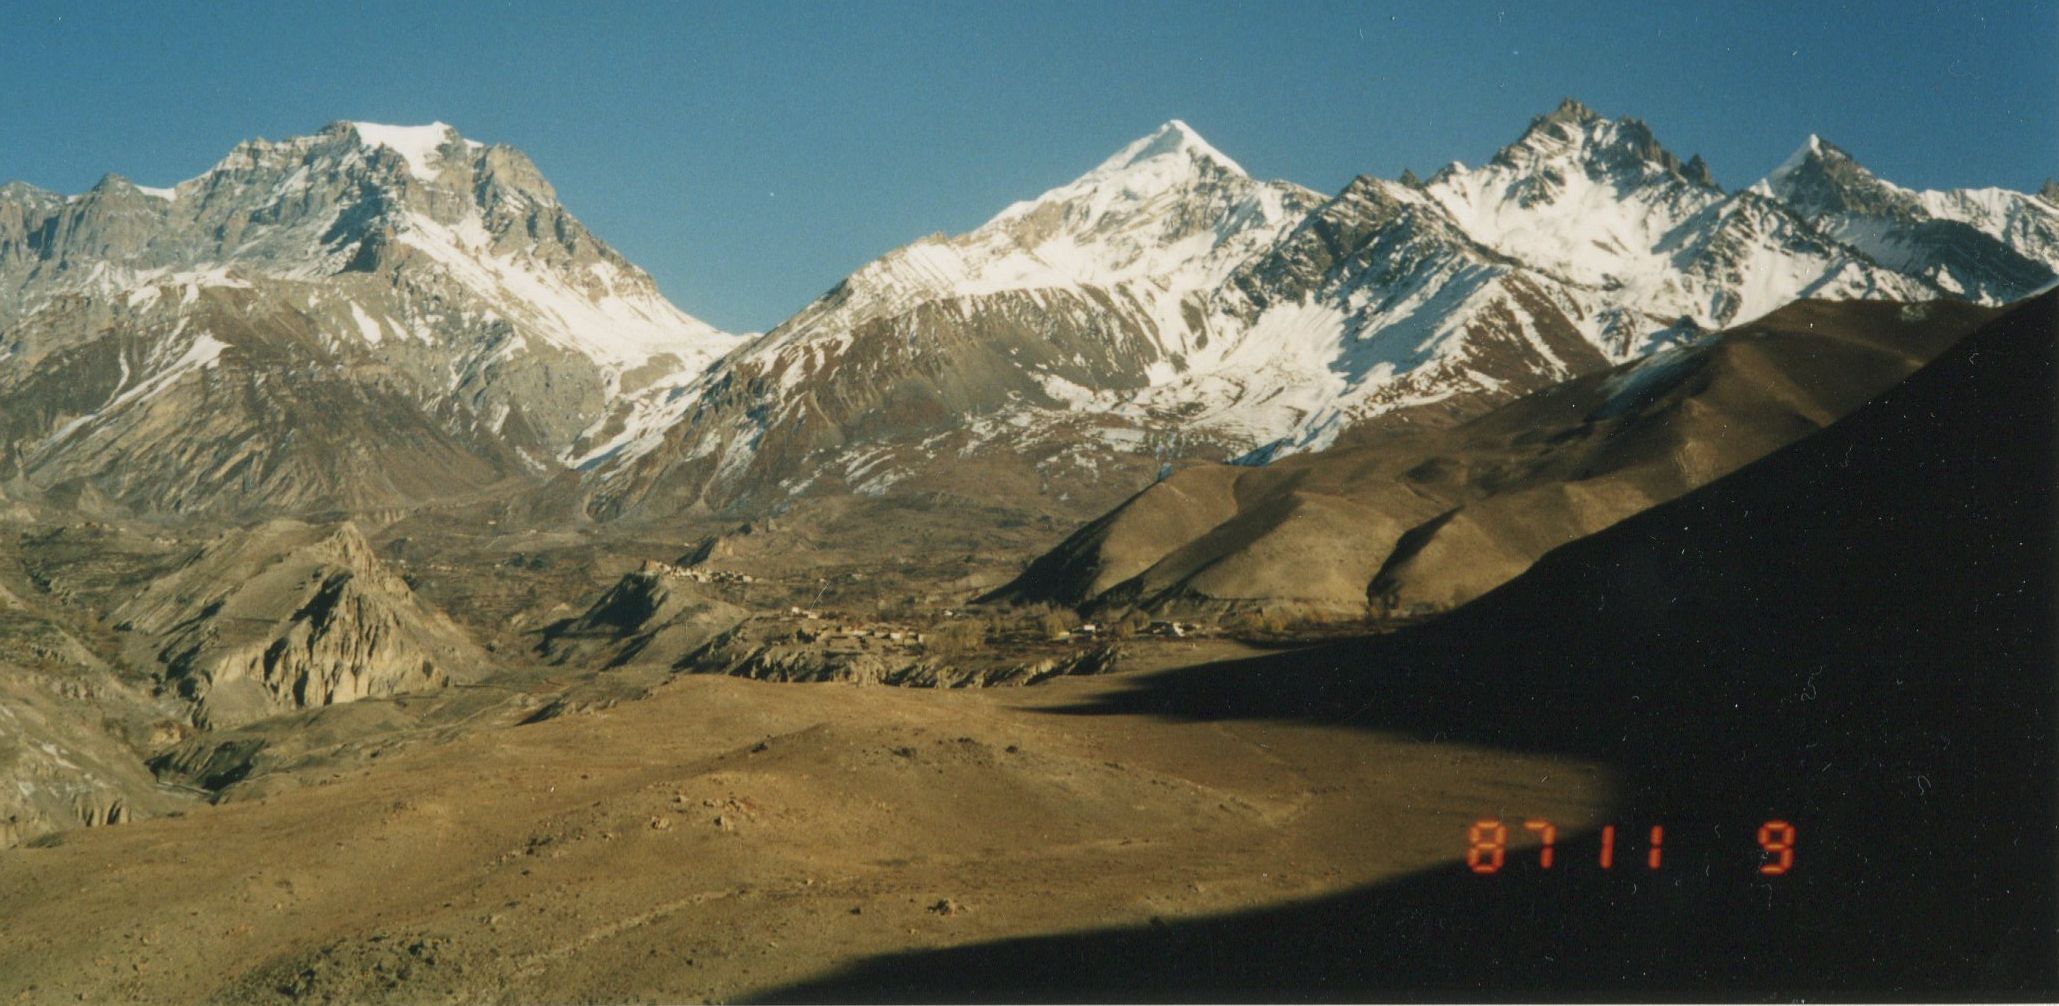 View back to Tharong La and Tharong La Peak on descent from Muktinath